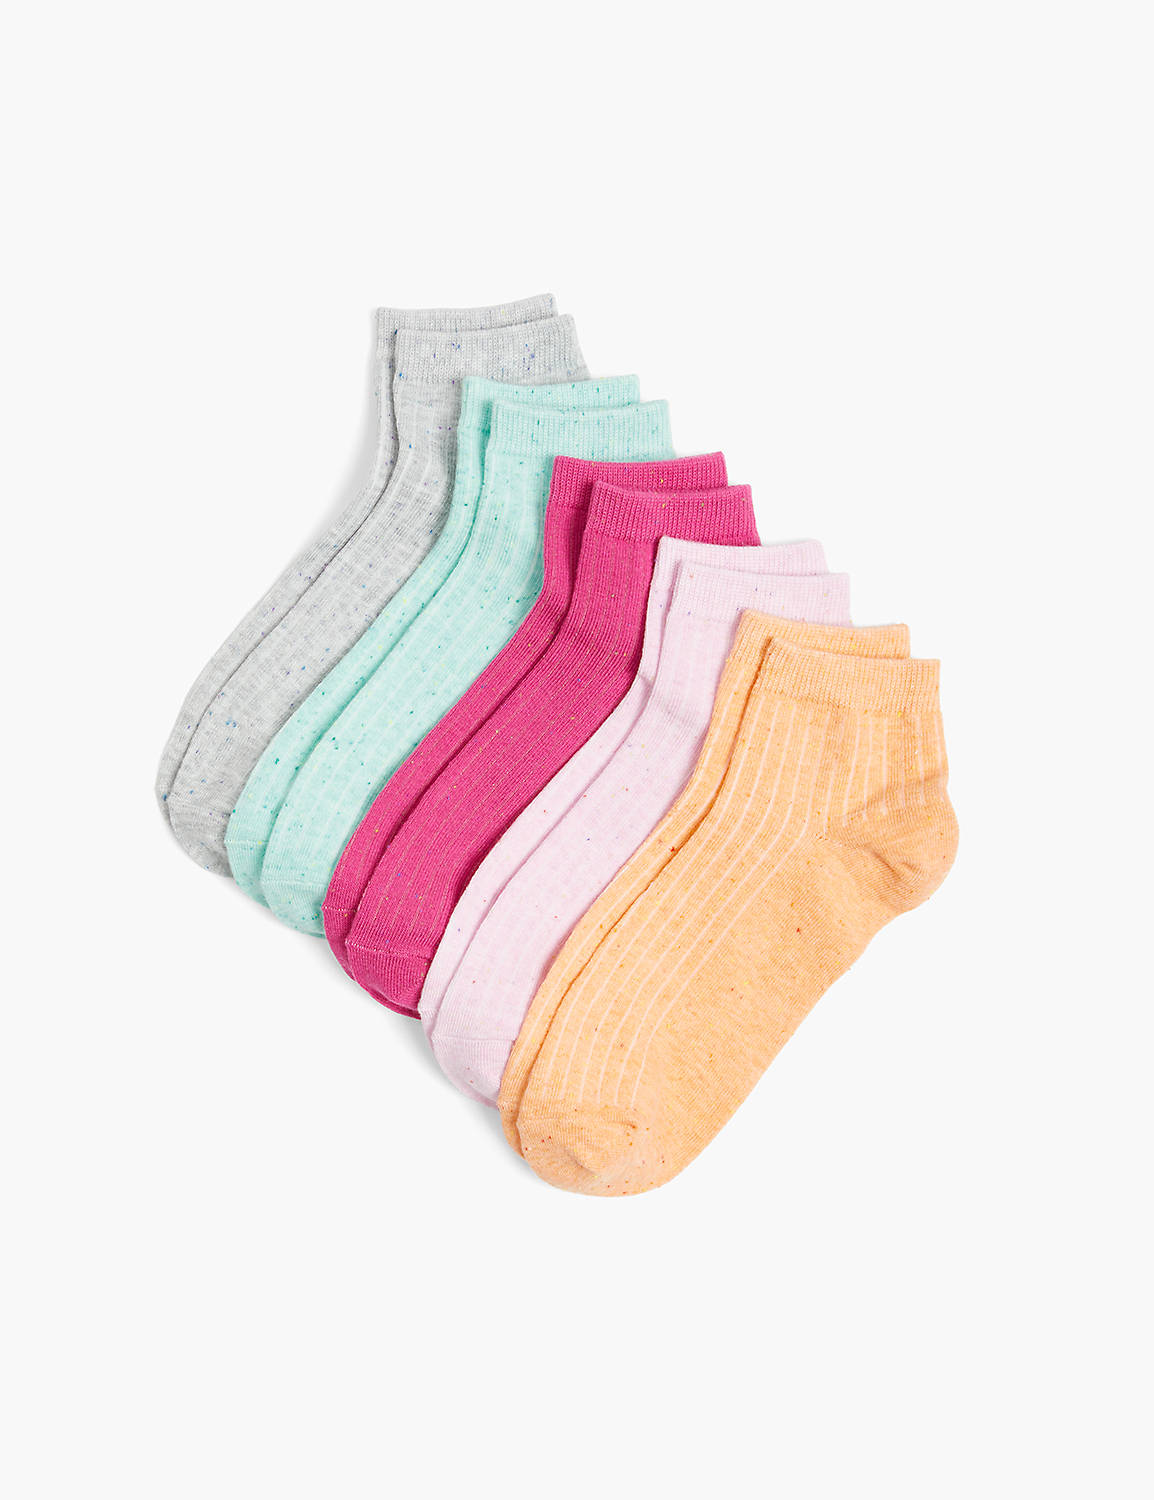 5 Pack Nep Ankle Sock S 1140423 Product Image 1